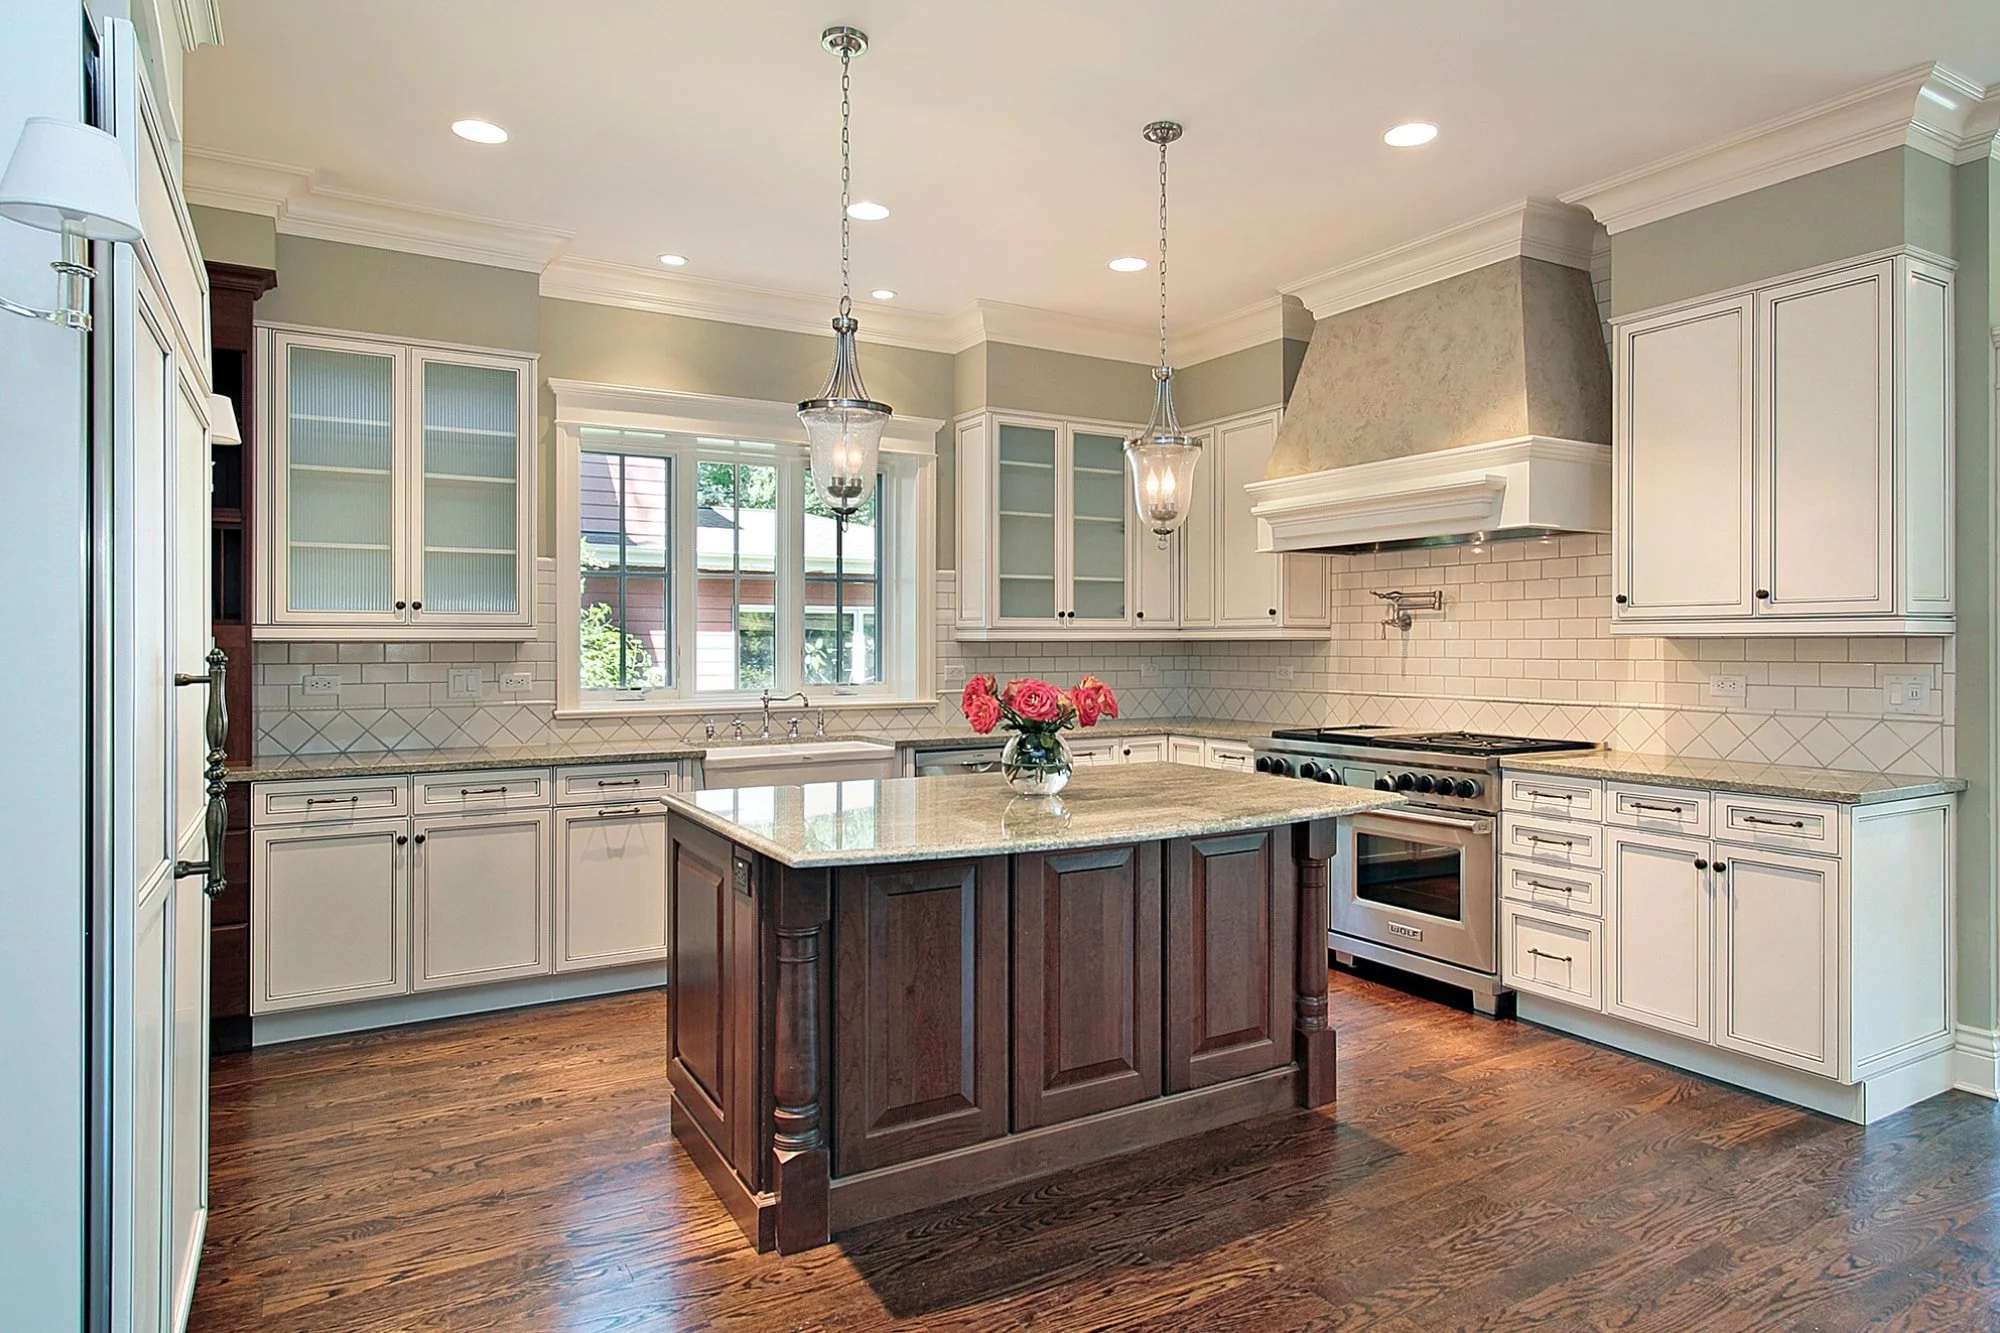 Consider These 3 Options When Updating Kitchen Cabinets